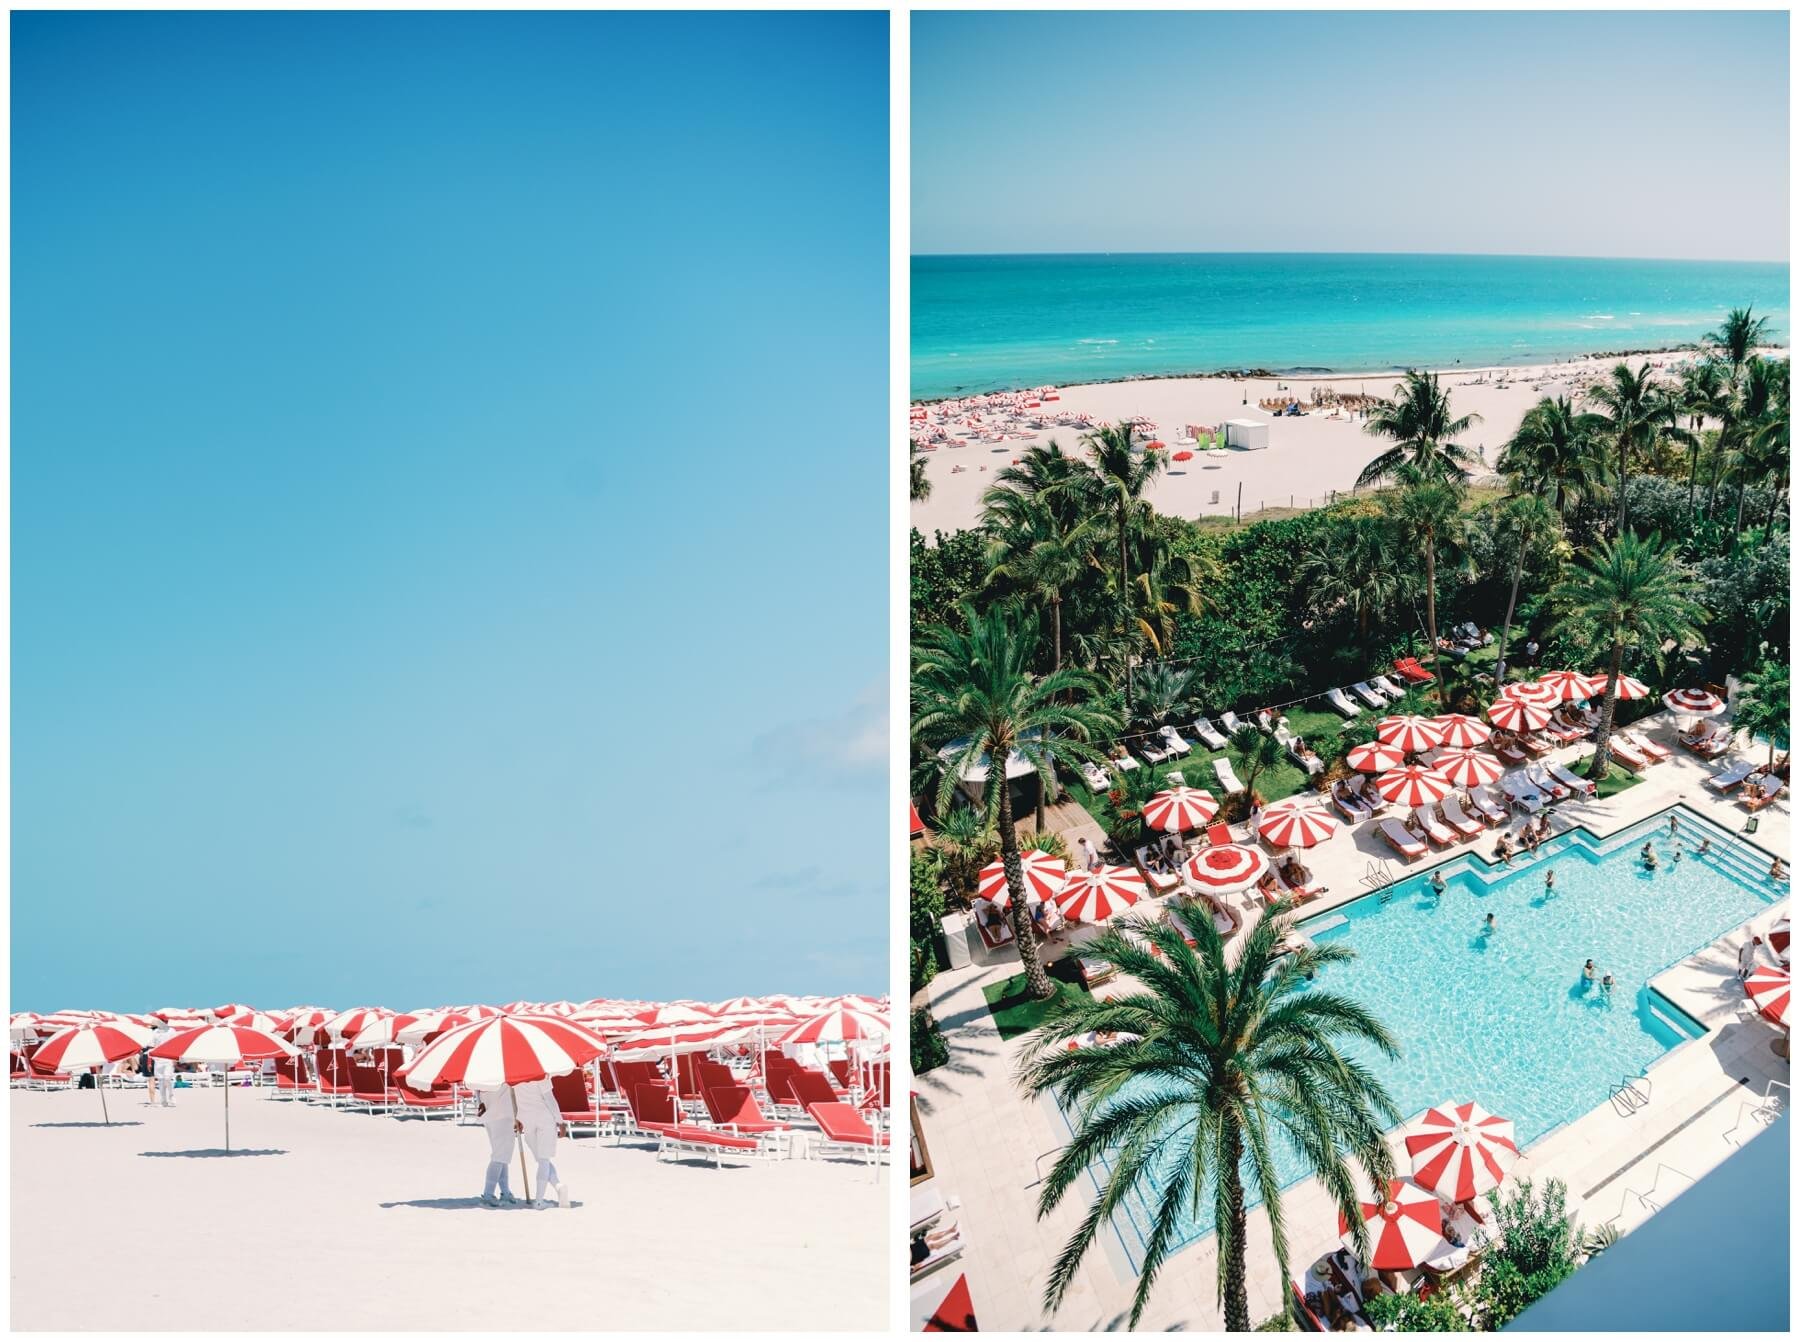 A sea of red and white umbrellas on North Beach in Miami | View of pool and ocean from hotel balcony in North Beach